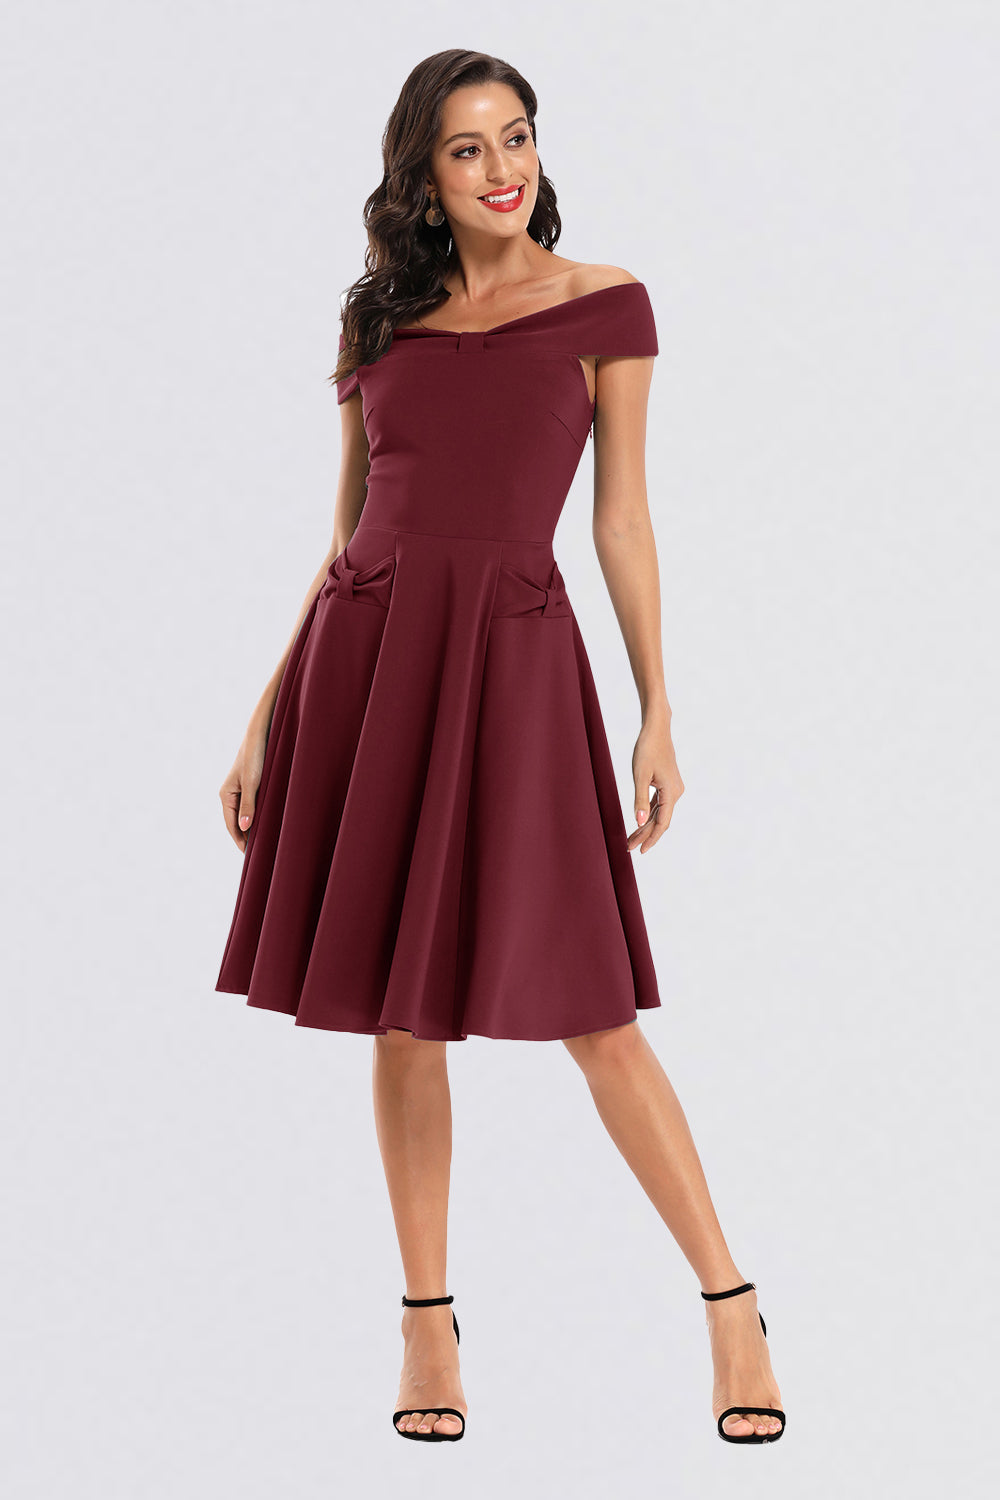 A-line Satin Off the Shoulder Homecoming Dresses